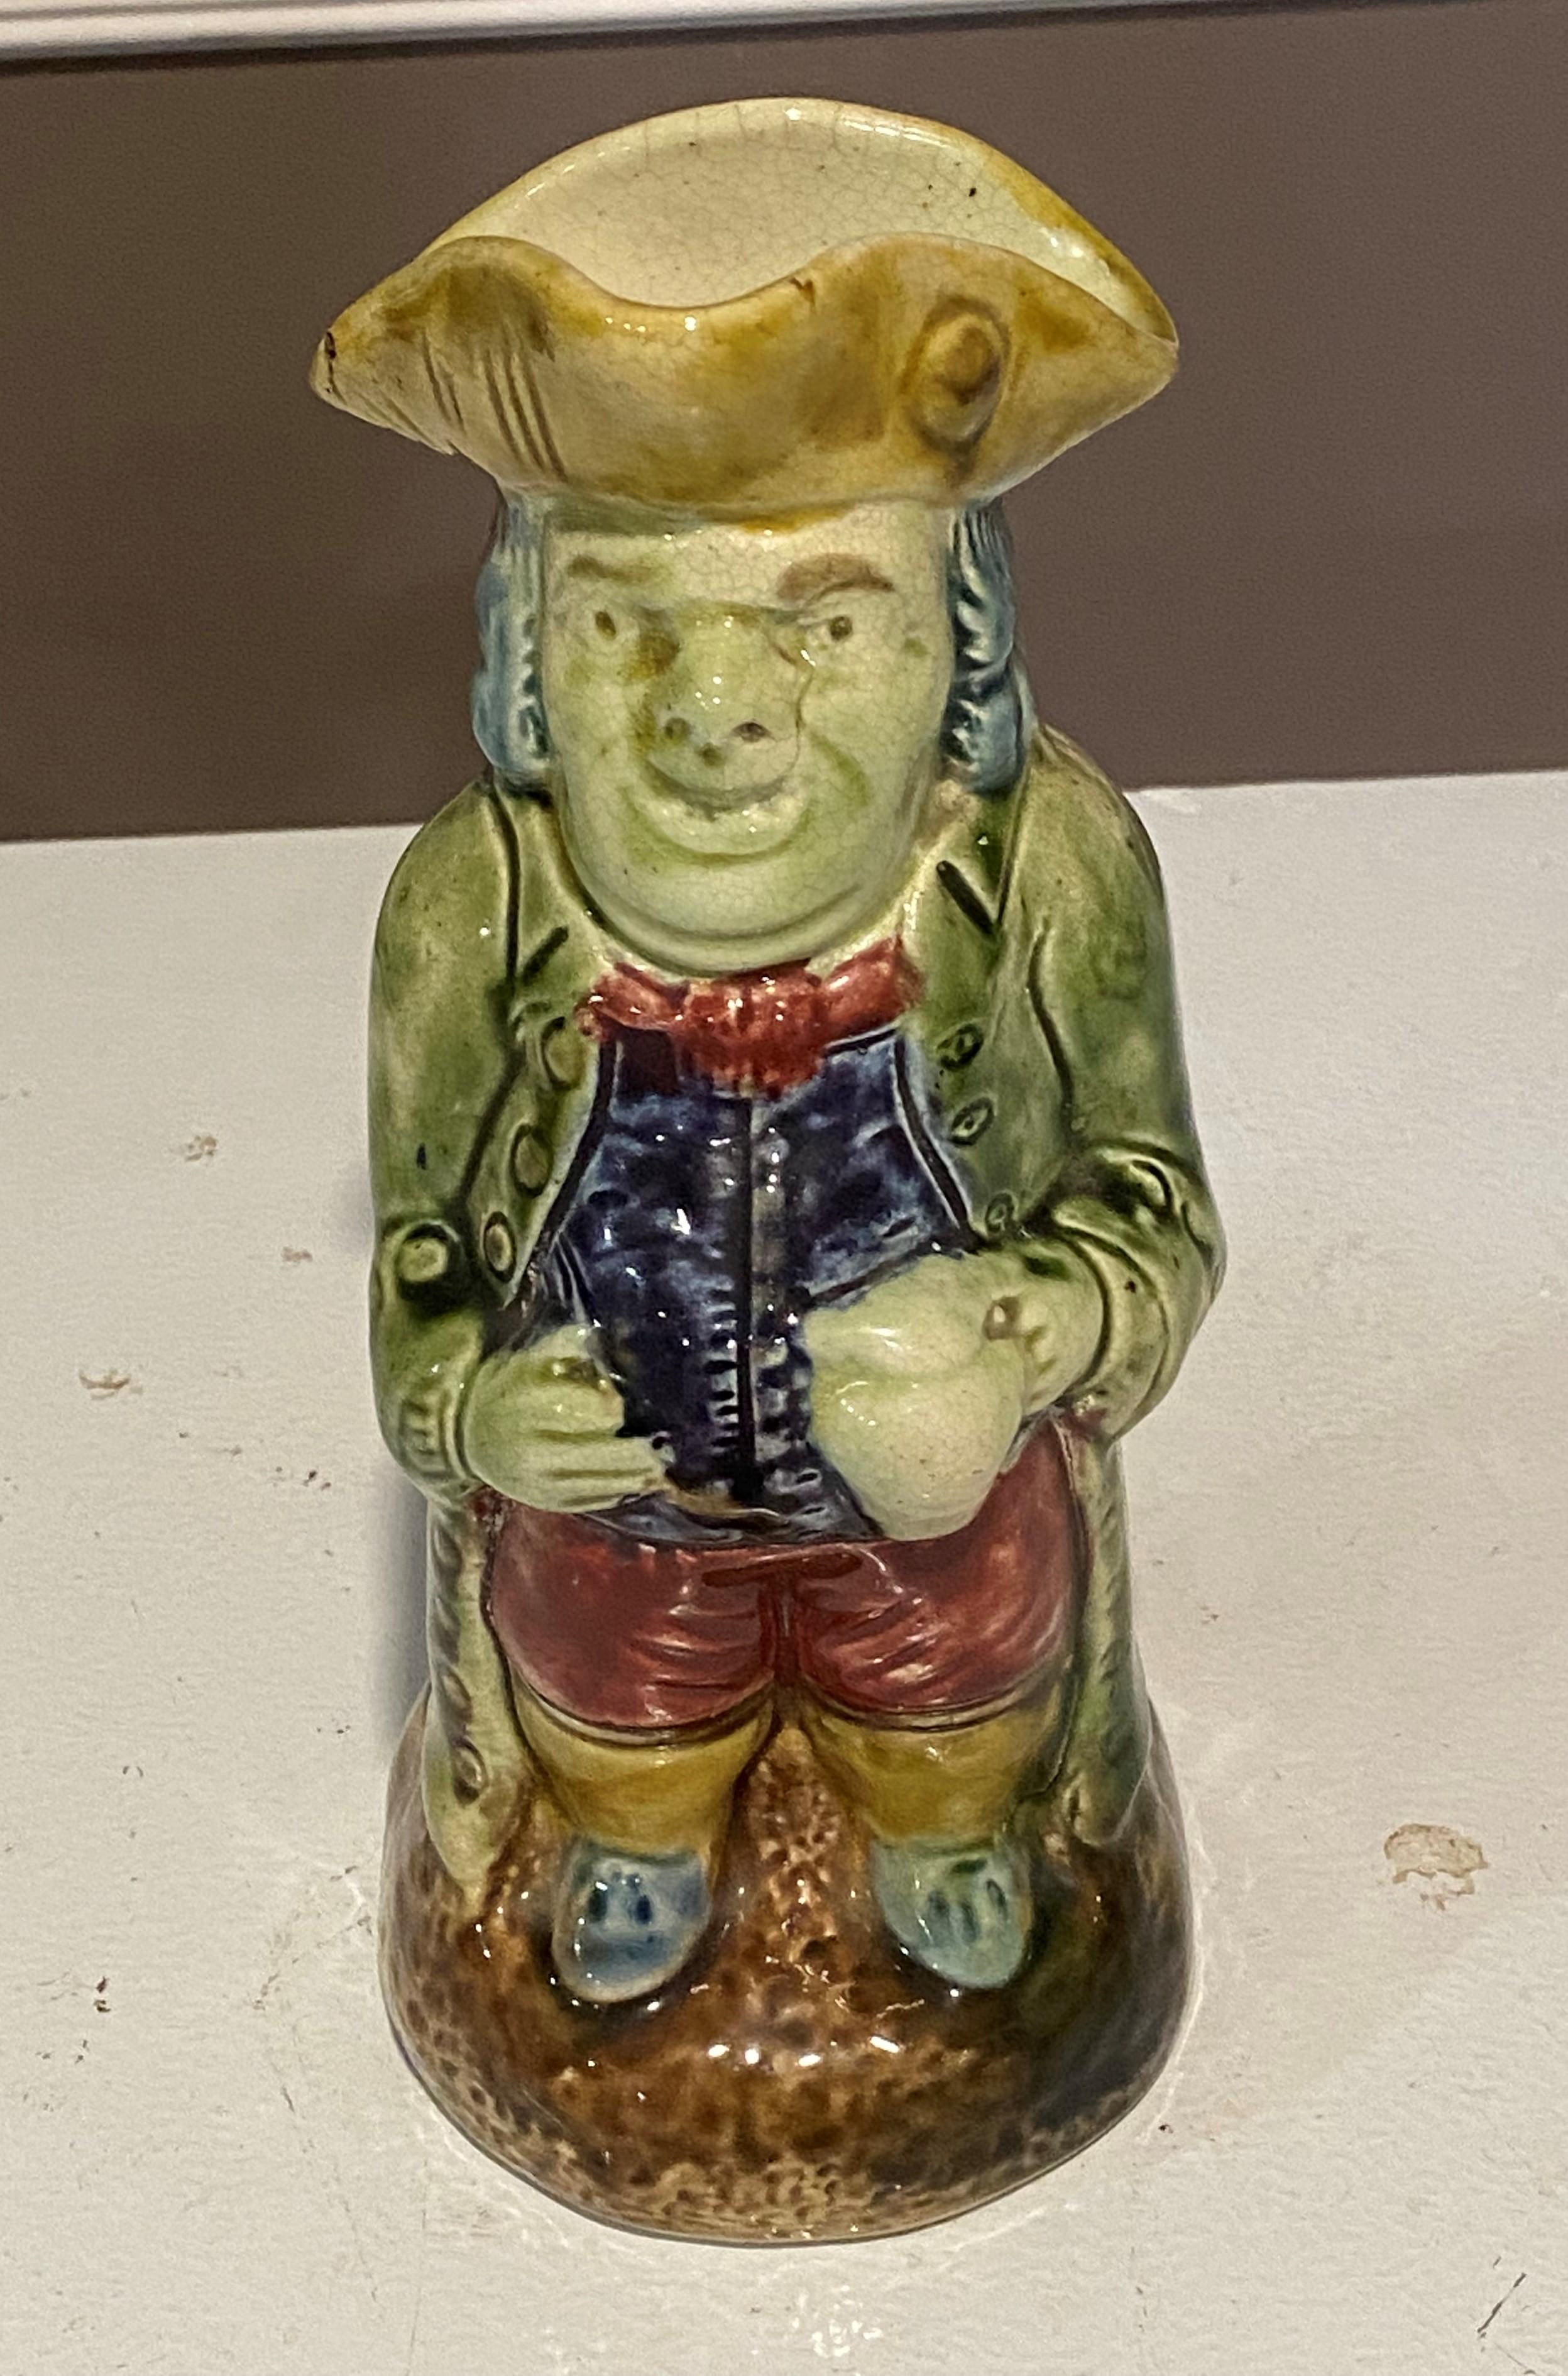 Good pearlware toby jug, Provenance Eli Kaplan Antques, NYC and Christies, NY. I se no damage or repair.